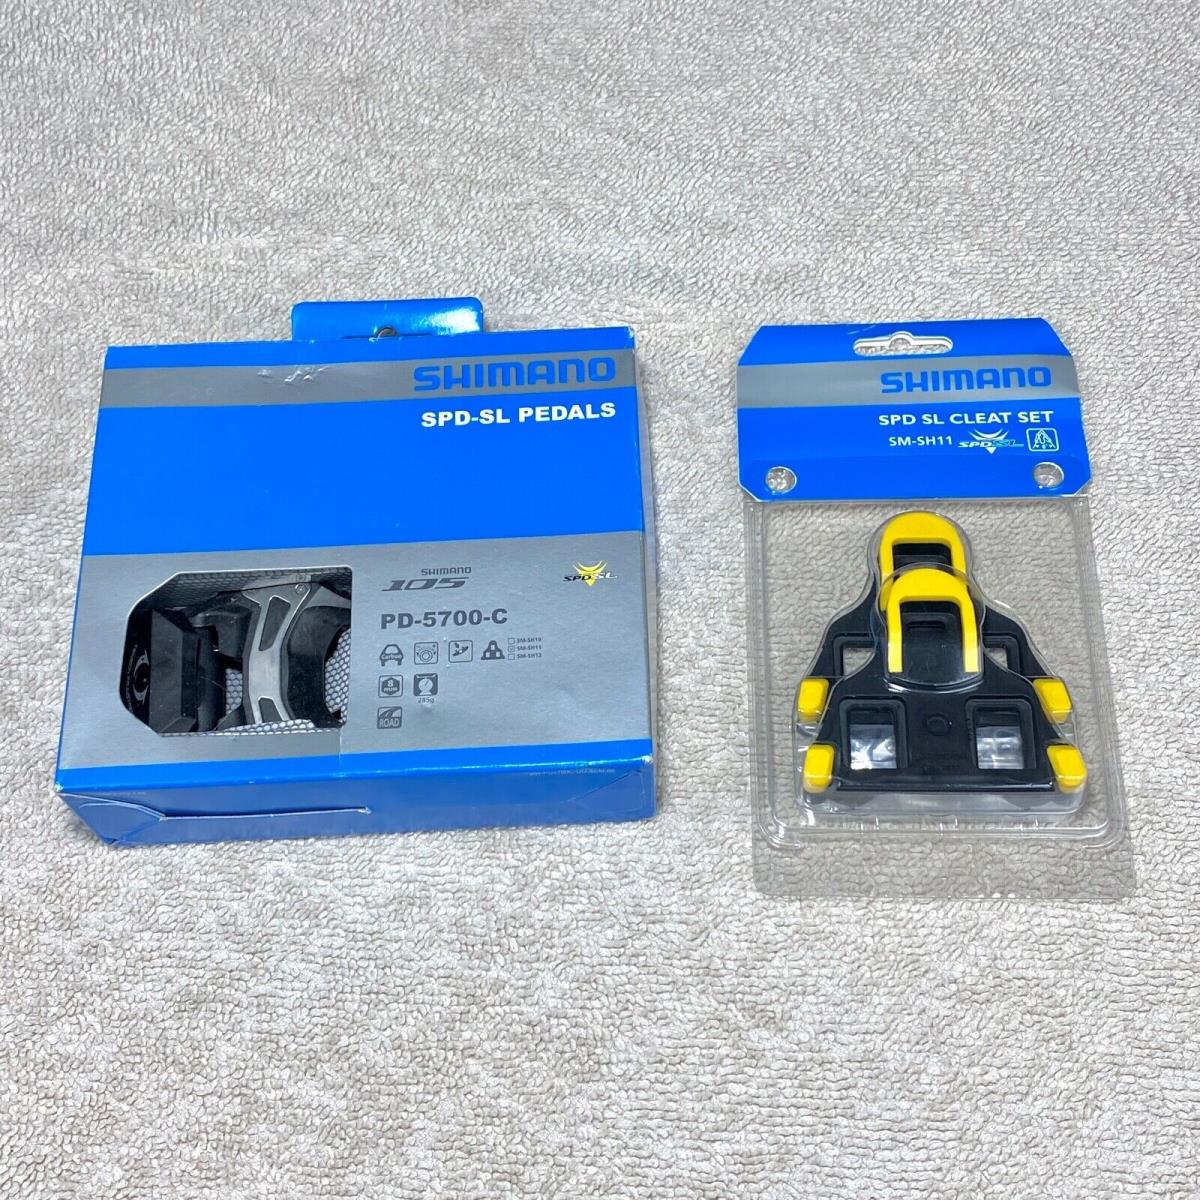 Shimano 105 PD-5700C Carbon Pedals Includes Two Cleat Sets